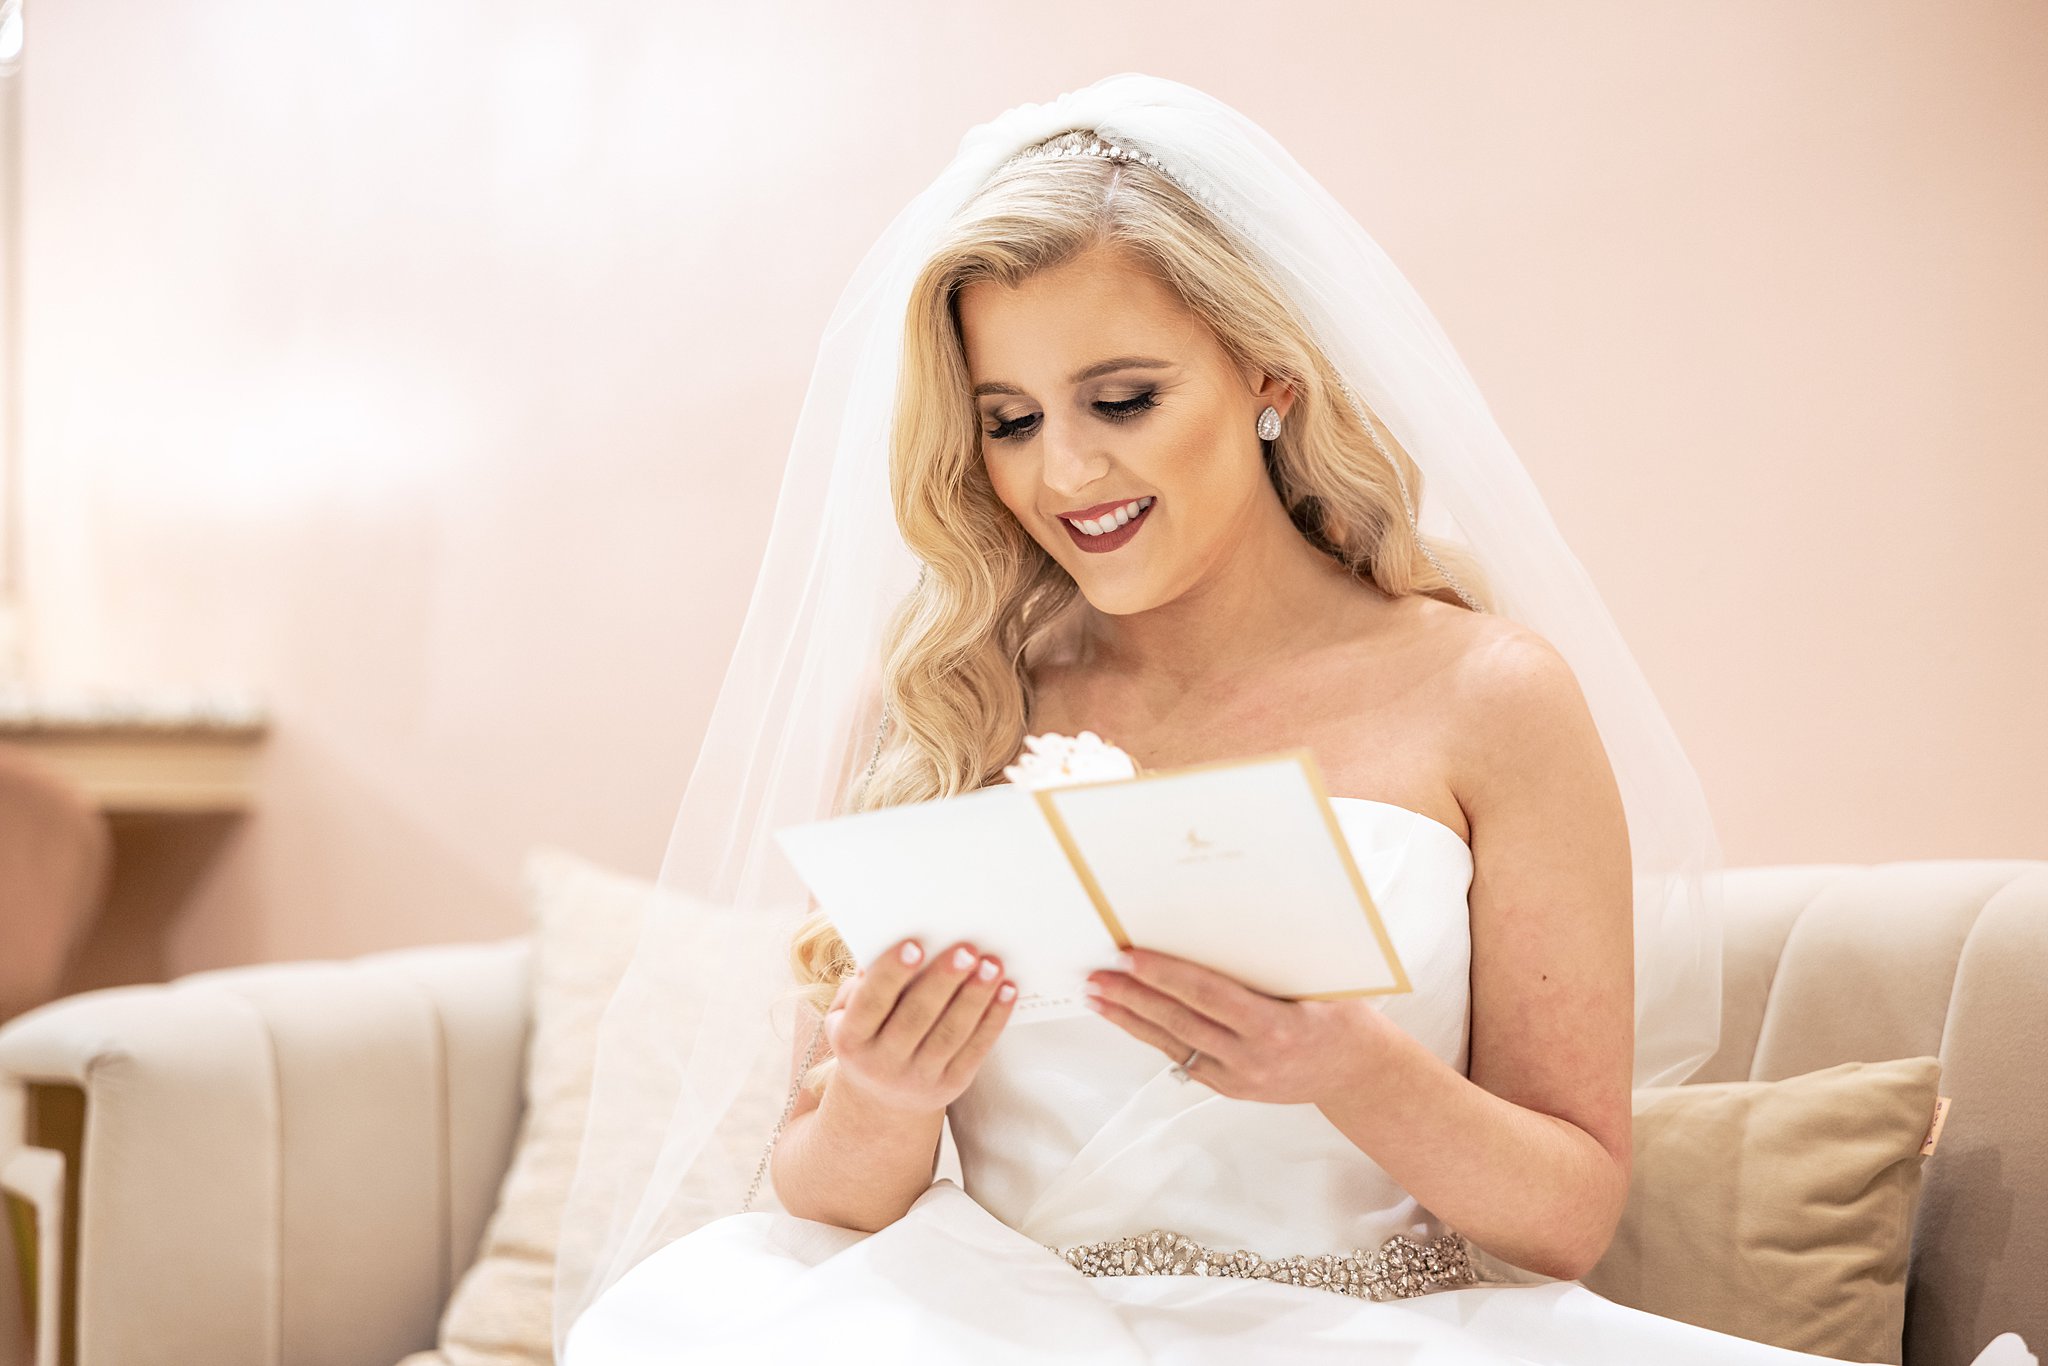 A bride sits on a couch in her dress and veil reading a card with a smile